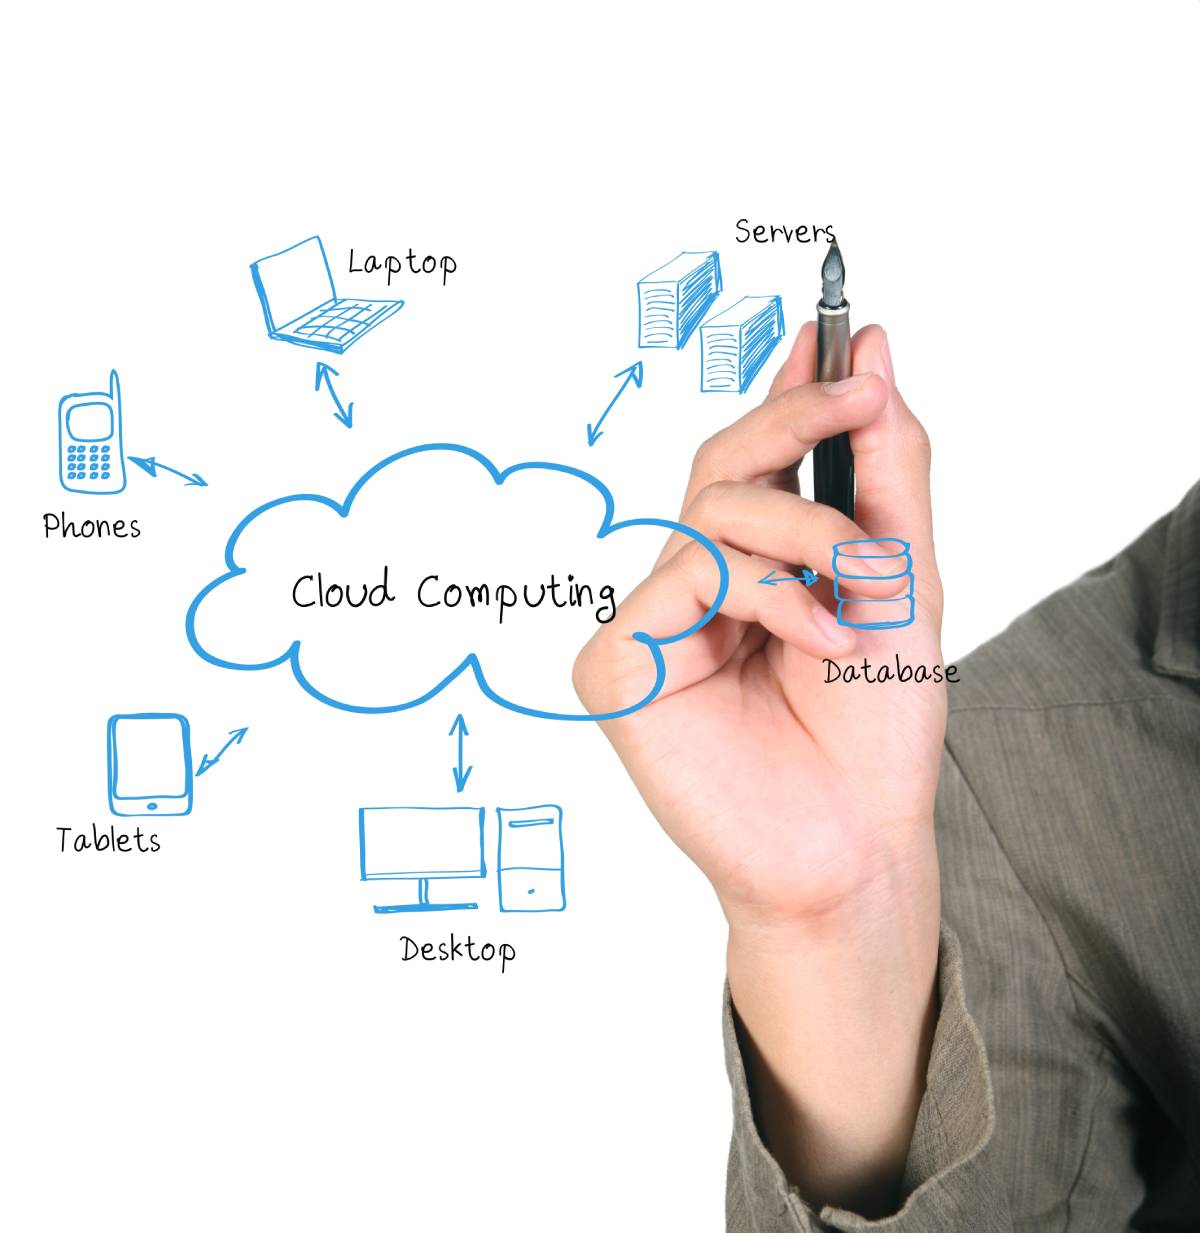 A man holding a pen drawing a cloud with various devices connected to it with arrows